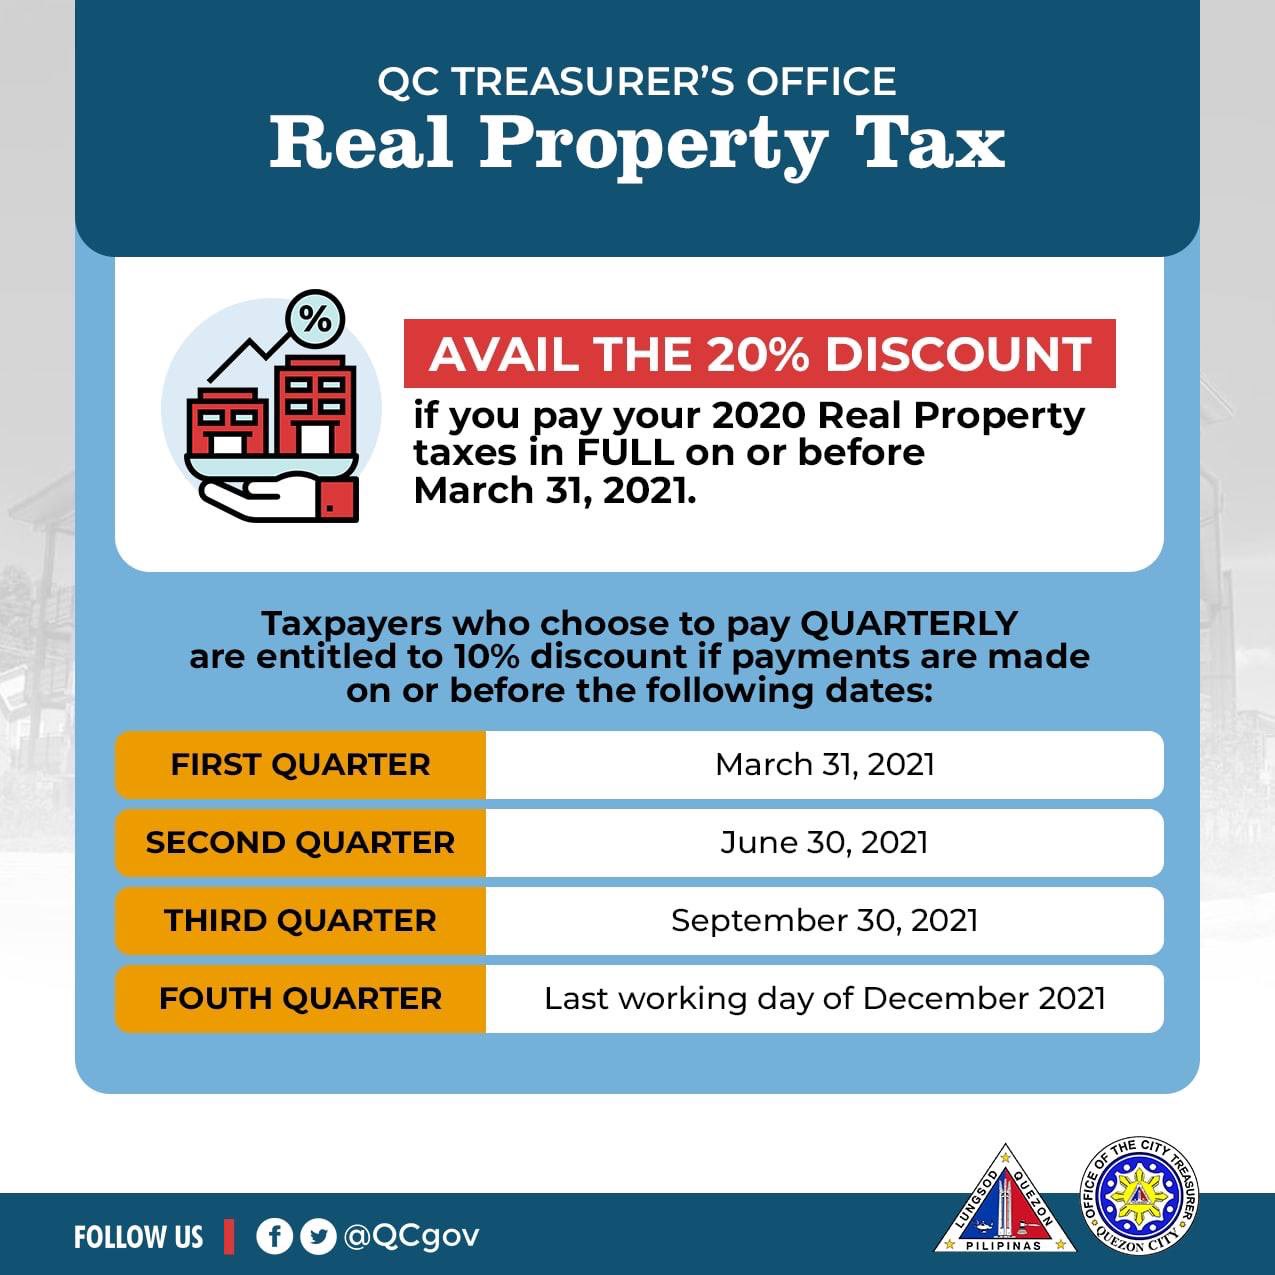 quezon-city-government-on-twitter-pay-your-real-property-taxes-early